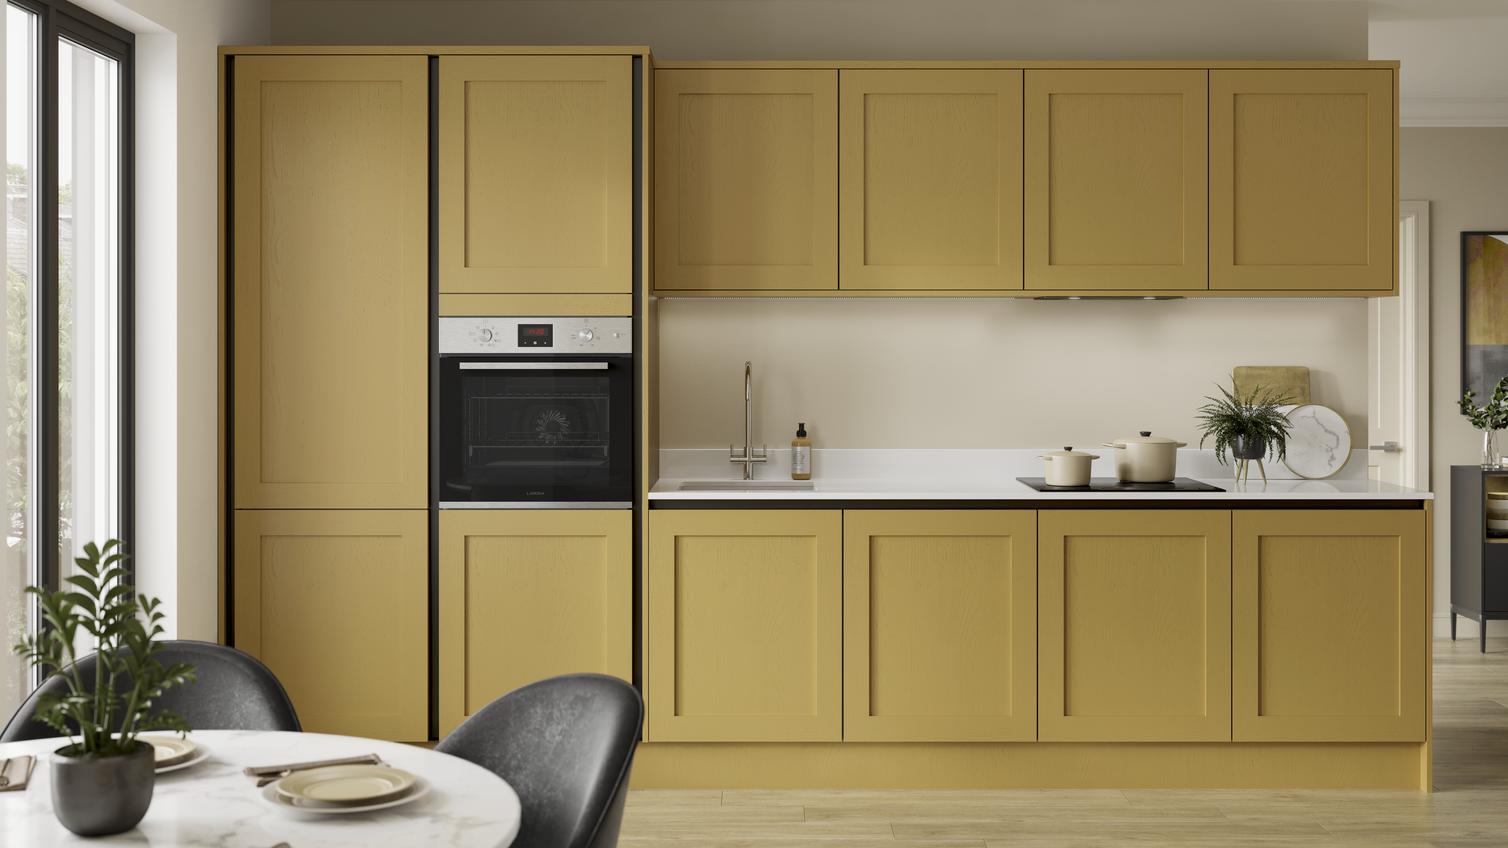 A handleless painted shaker kitchen in mustard yellow with black profiles. Includes white worktops and pale timber floors.